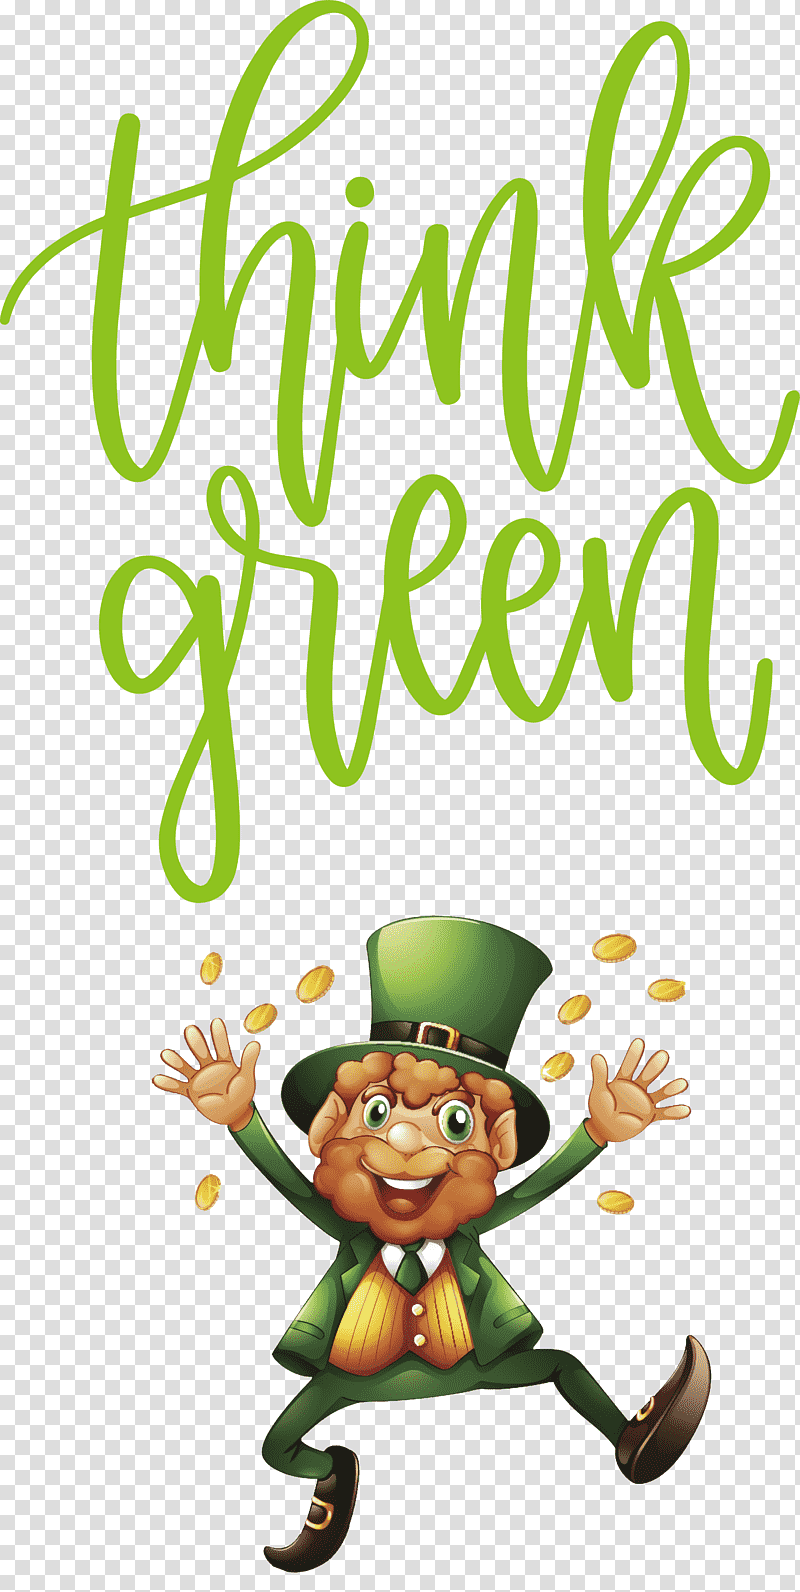 Think Green St Patricks Day Saint Patrick, Cartoon, Character, Meter, Happiness, Behavior, Tree transparent background PNG clipart